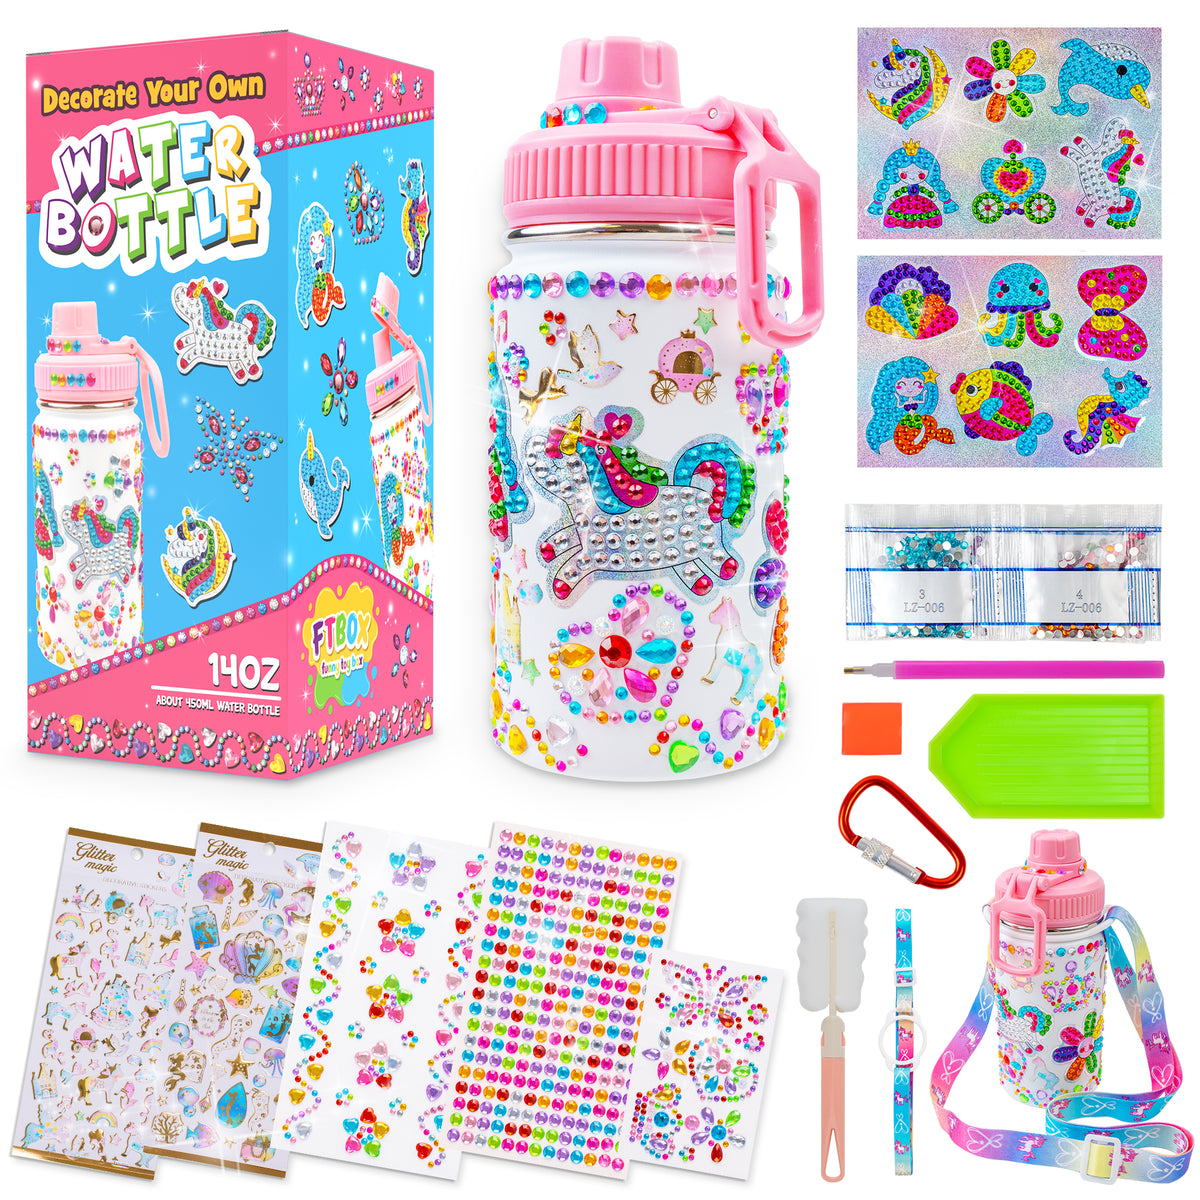  Decorate Your Own Water Bottle for Girls Age 6-8-10-12,DIY  Unicorn Diamond Painting Crafts Kits,Ideal Arts and Crafts Gifts Toys for  Little Girls Birthday Christmas : Toys & Games